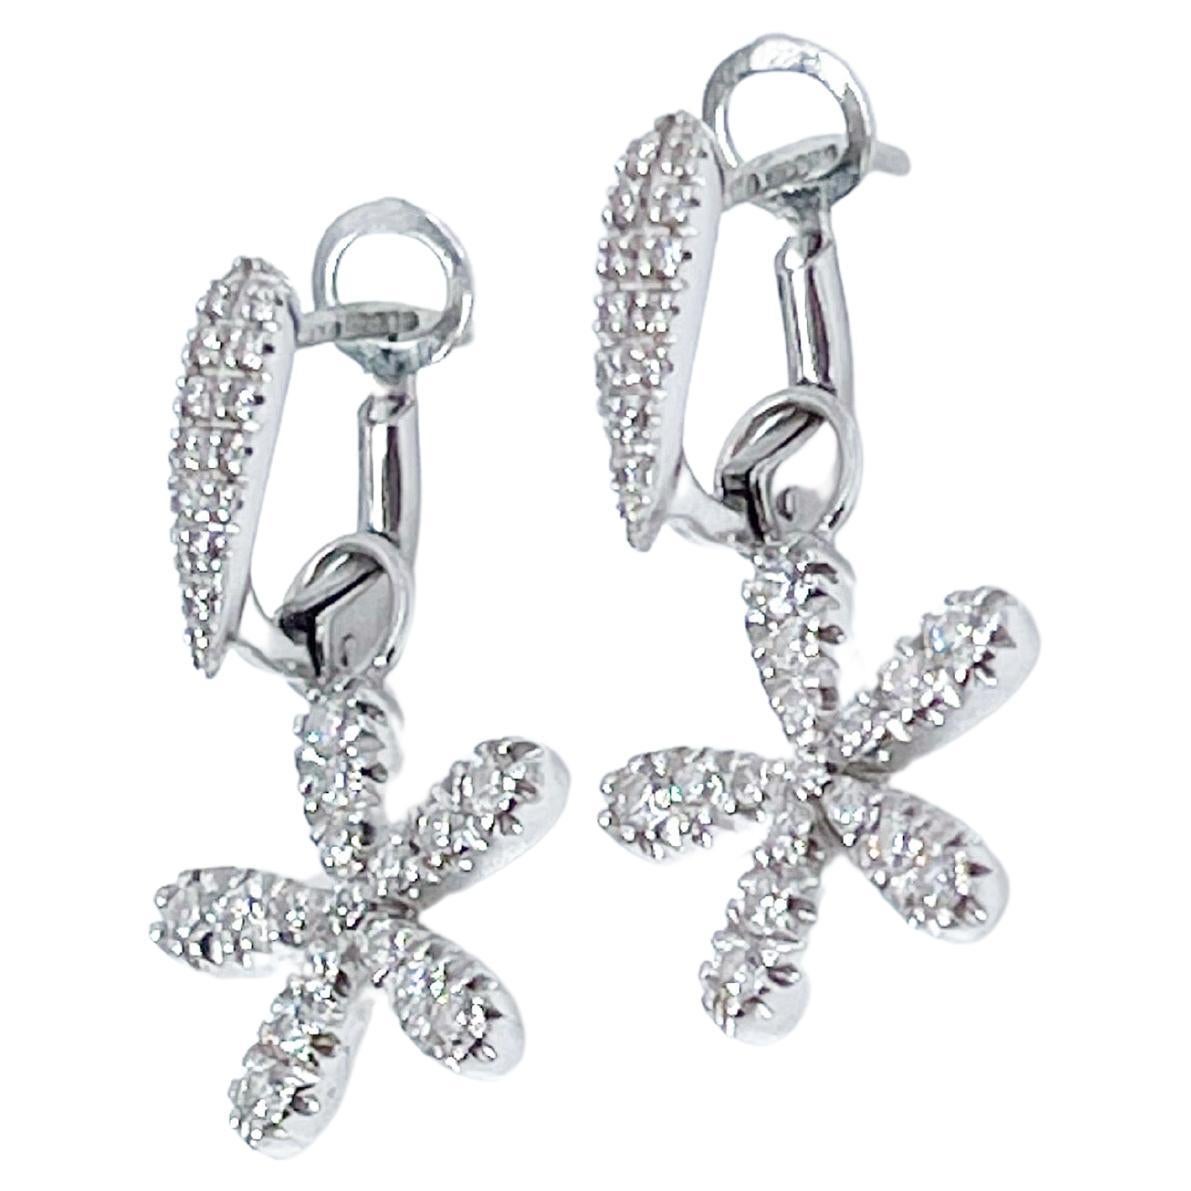 Flower Diamond Earrings 18KT White Gold Unique Dangling Two Ways Design For Sale